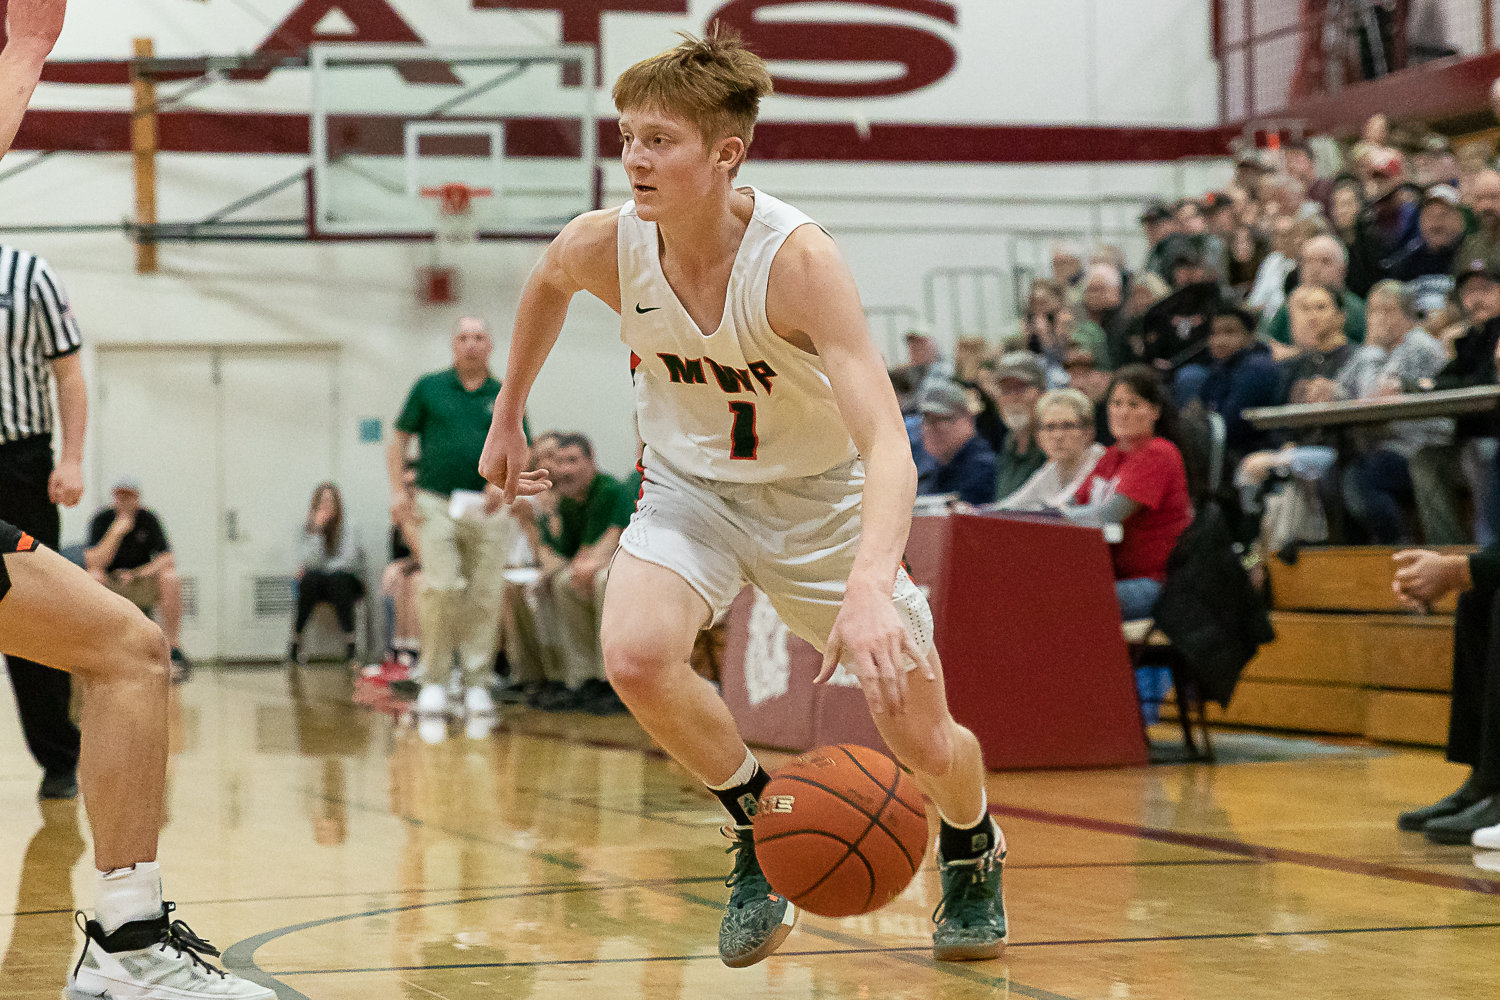 Morton-White Pass guard Jake Cournyer drives baseline against Rainier in the 2B District 4 quarterfinals at W.F. West Feb. 8.